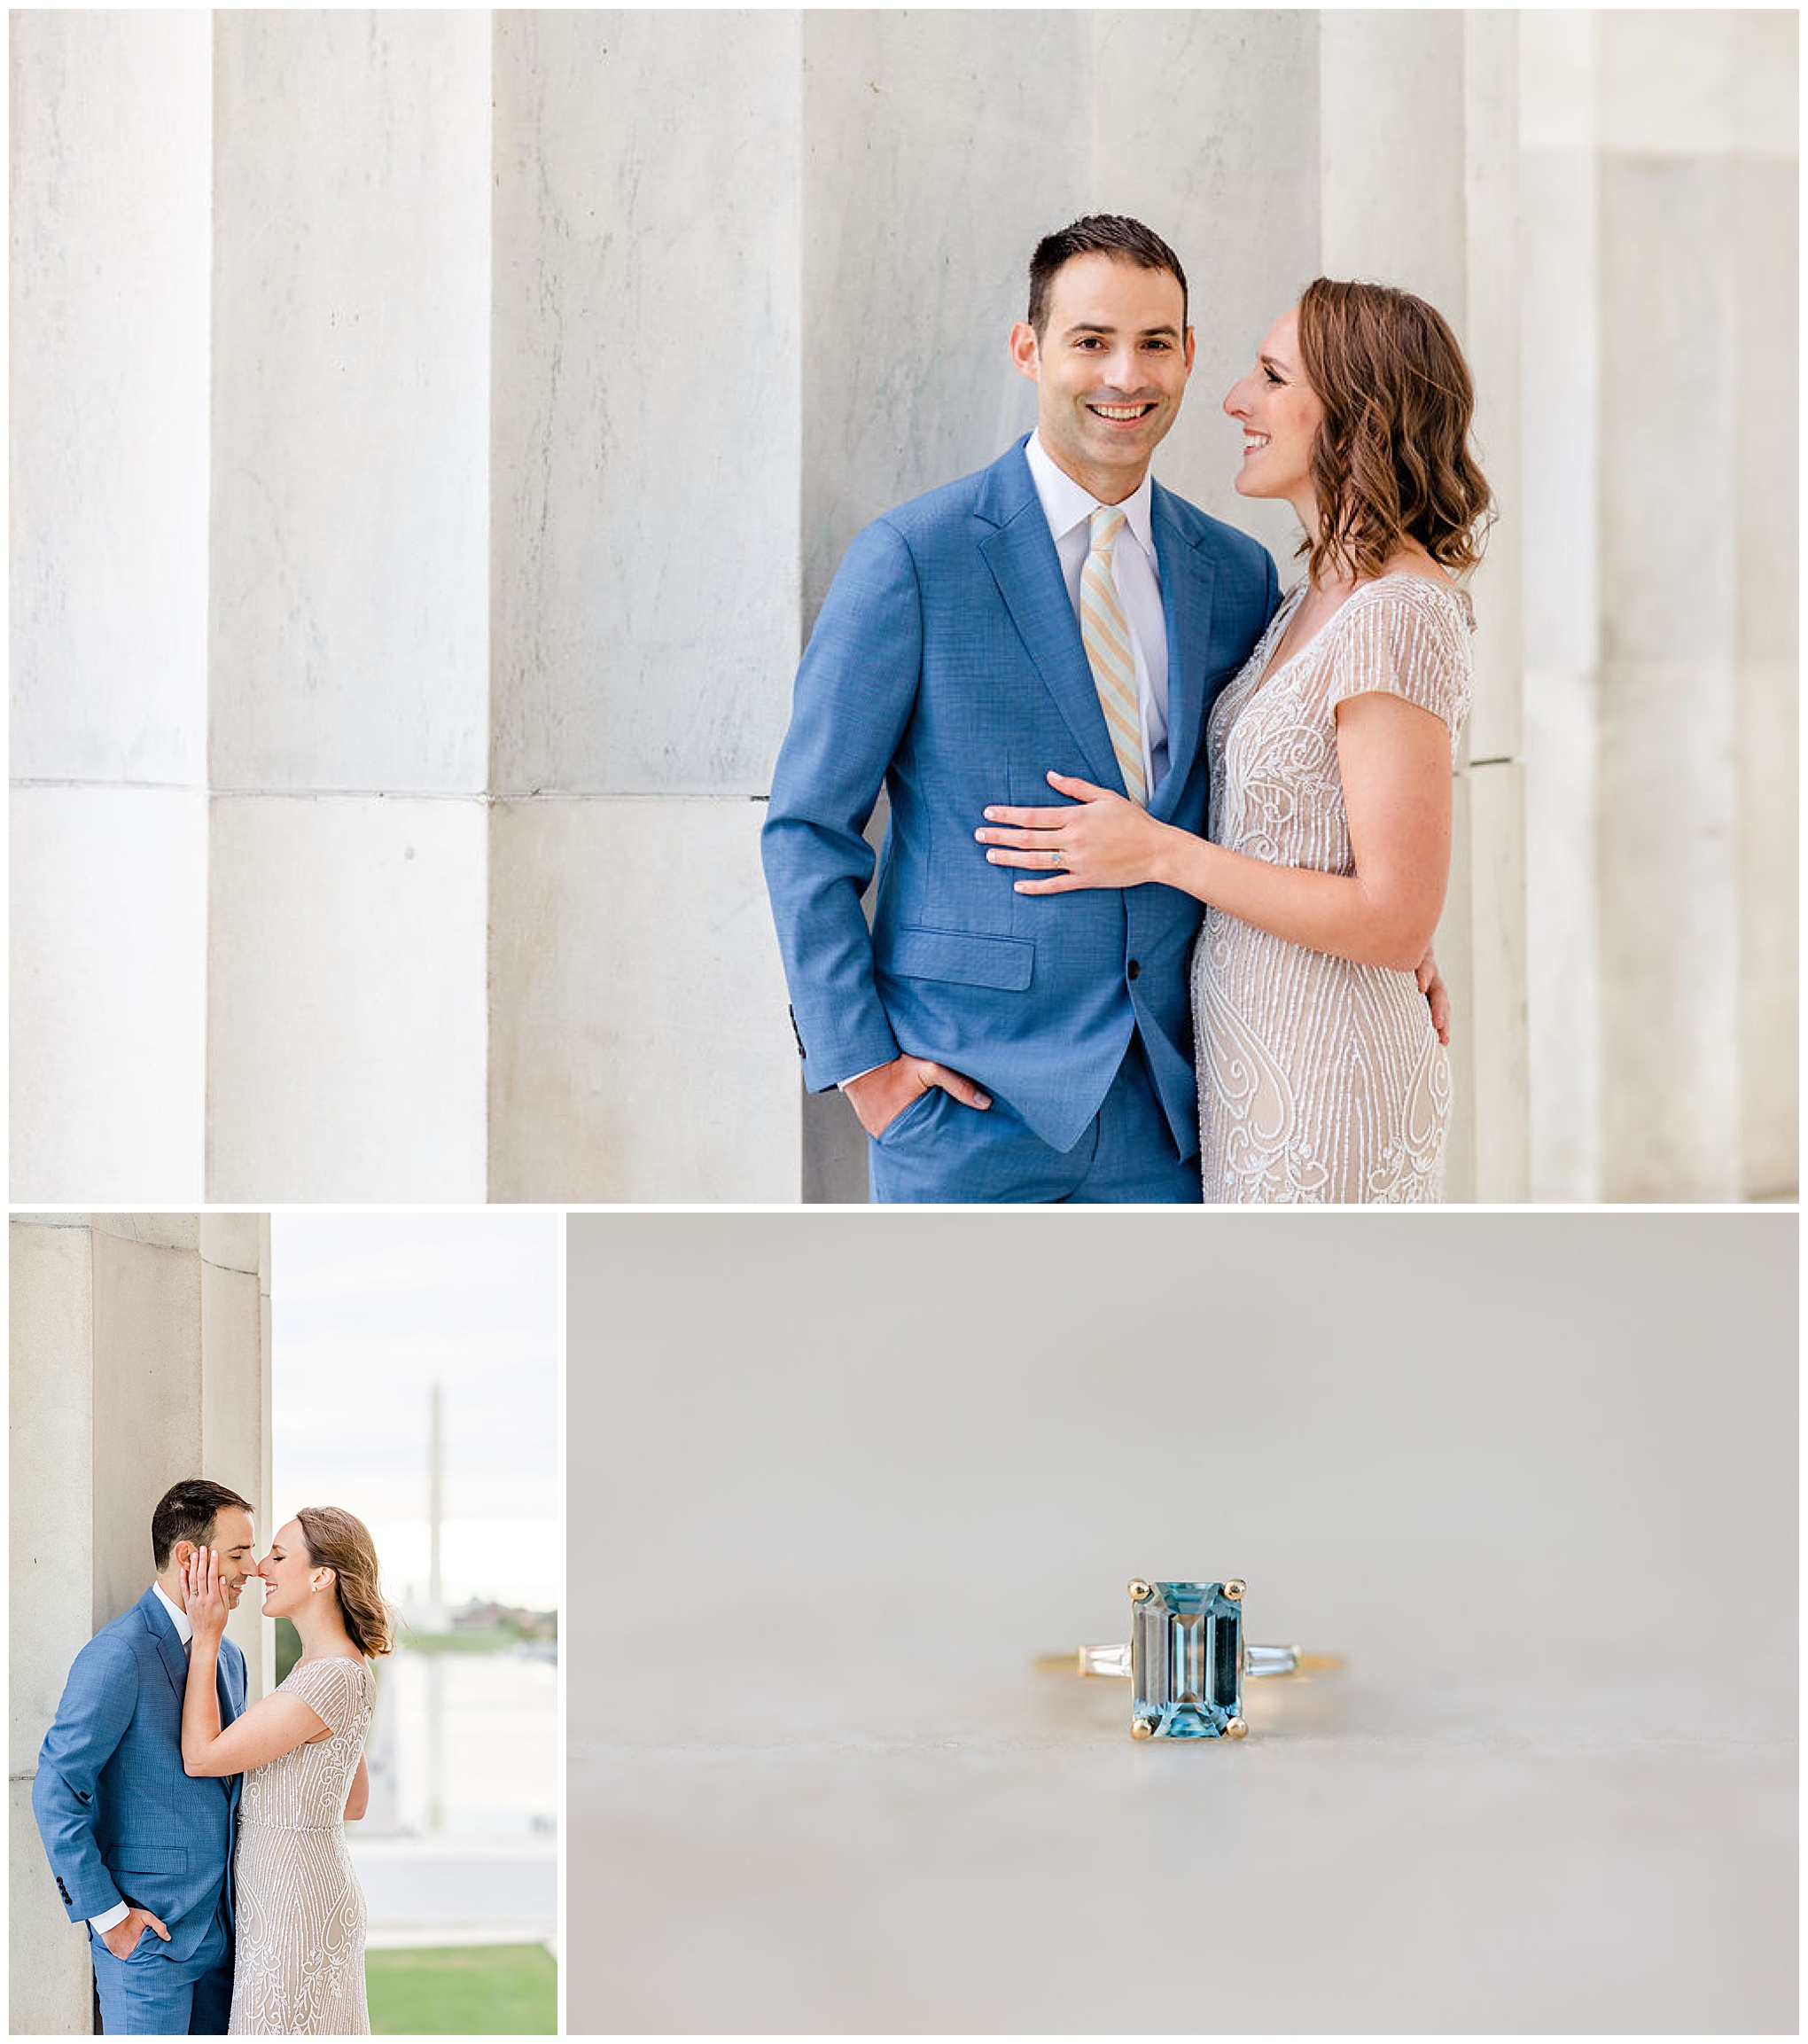 formal DC engagement portraits, Washington DC engagement photos, DC engagement photographer, DC portraits, BHLDN dress, autumn engagement portraits, formal engagement photos, formal portraits, Rachel E.H. Photography, blue-green engagement ring, couple almost kissing, woman looking at man